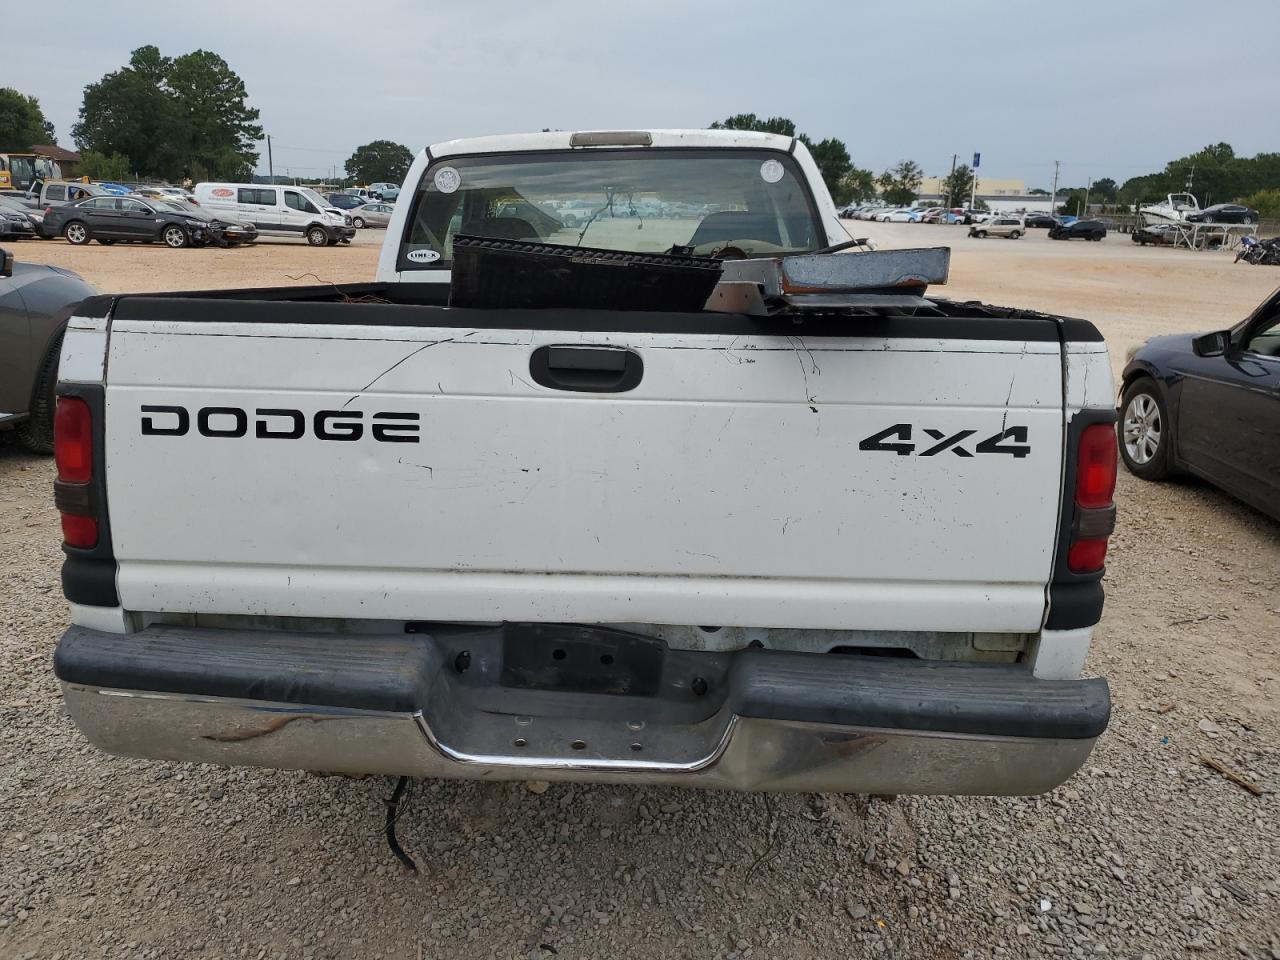 3B7KF23741G****** Salvage and Repairable 2001 Dodge Ram in Alabama State